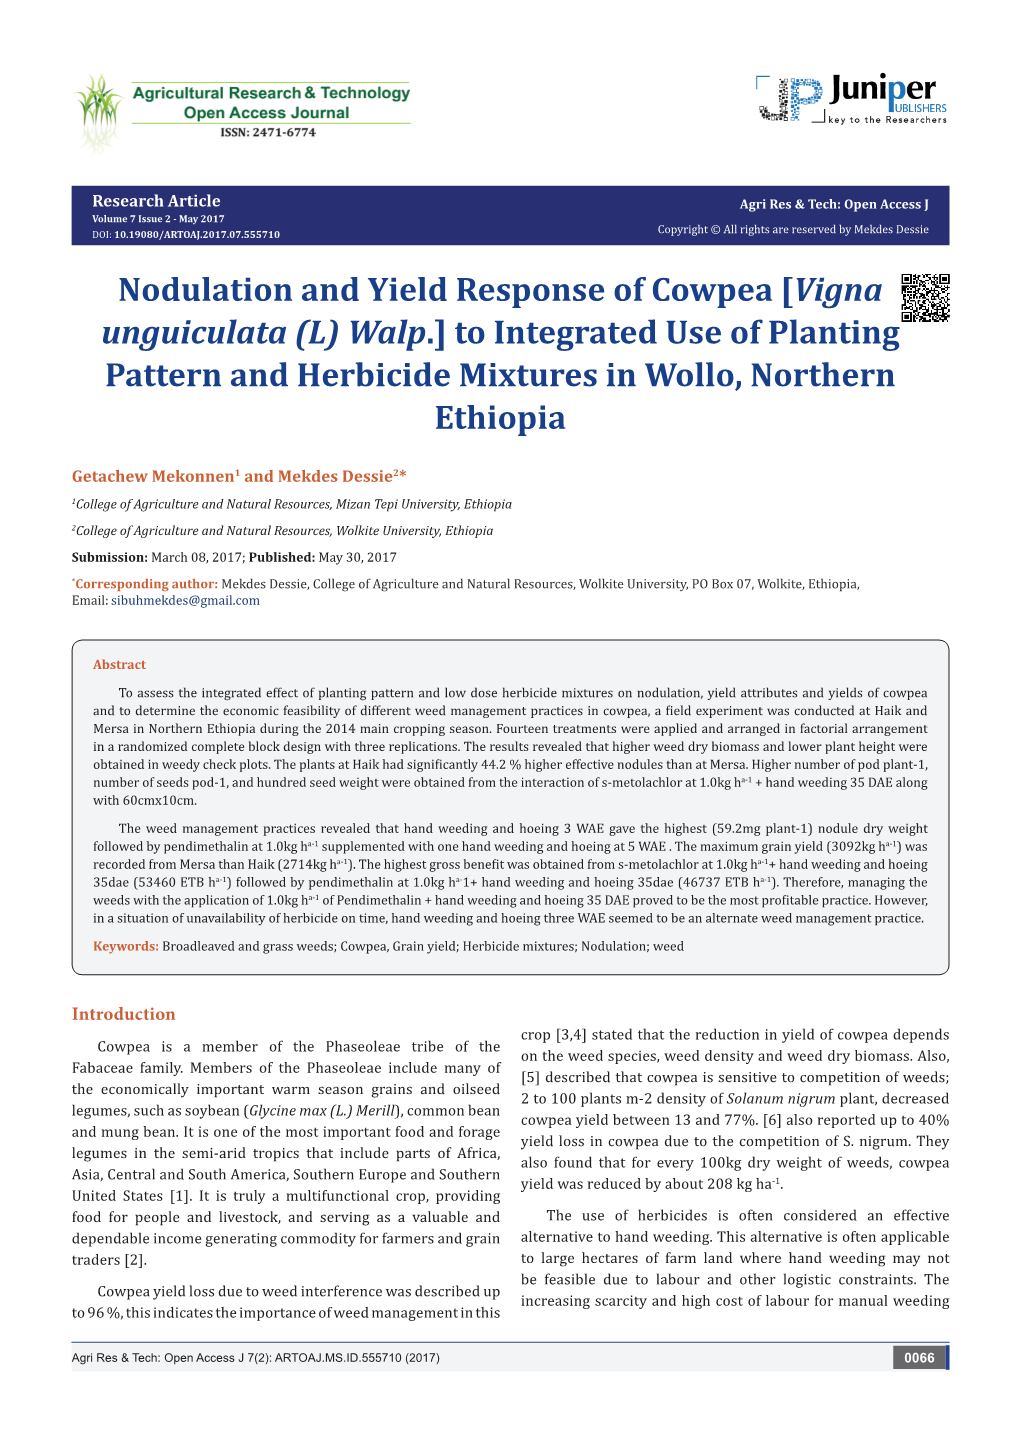 Nodulation and Yield Response of Cowpea [Vigna Unguiculata (L) Walp.] to Integrated Use of Planting Pattern and Herbicide Mixtures in Wollo, Northern Ethiopia